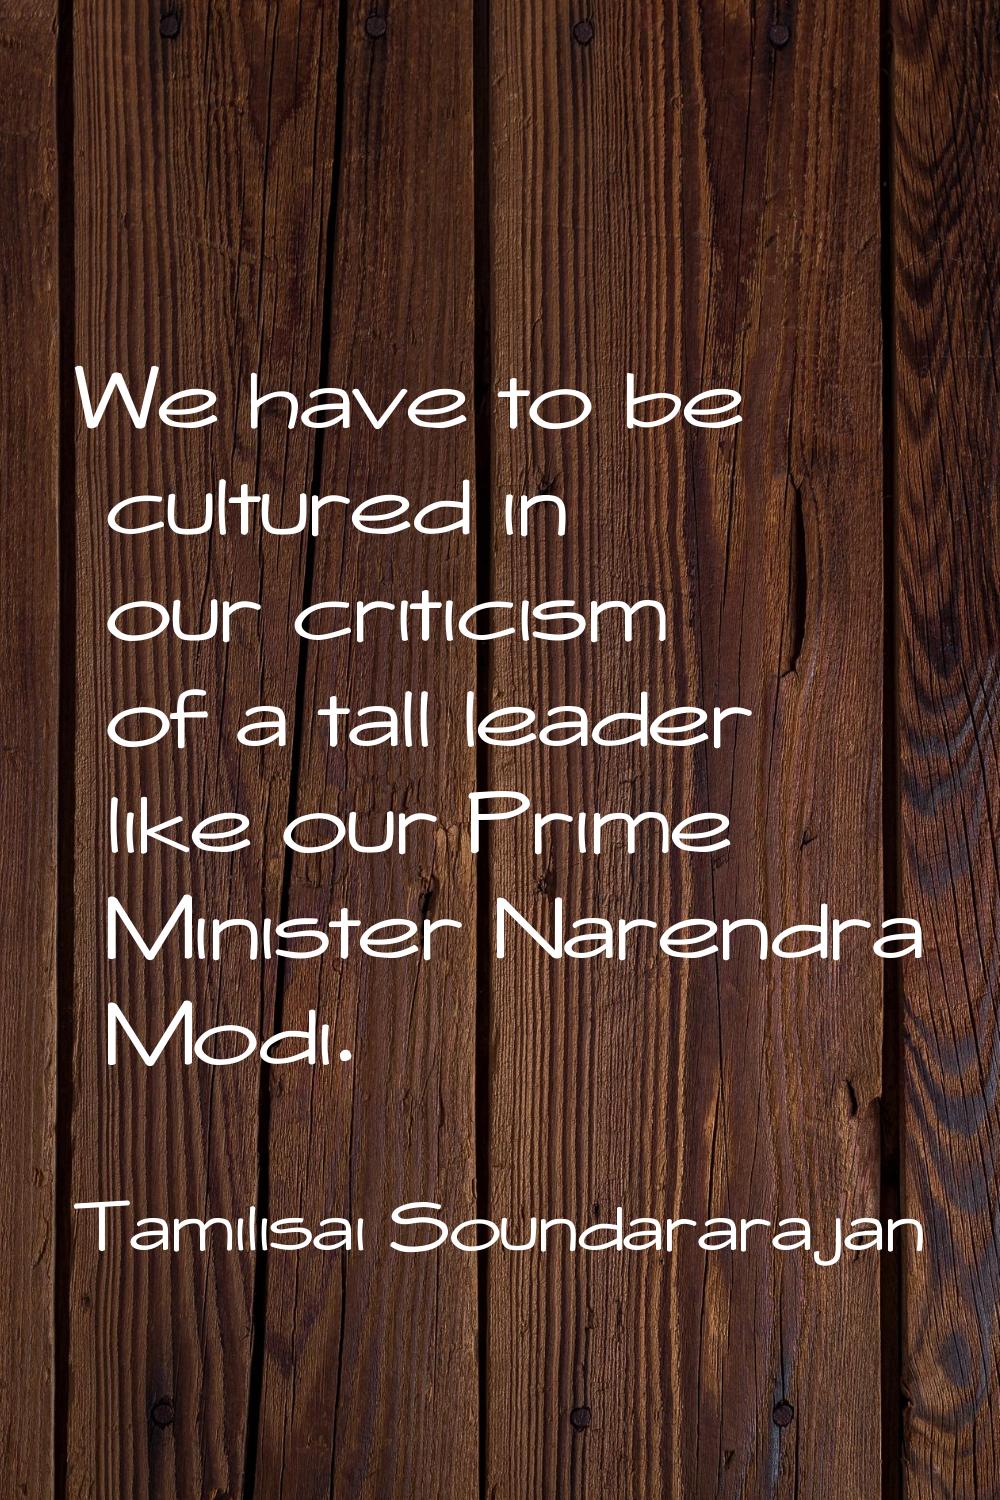 We have to be cultured in our criticism of a tall leader like our Prime Minister Narendra Modi.